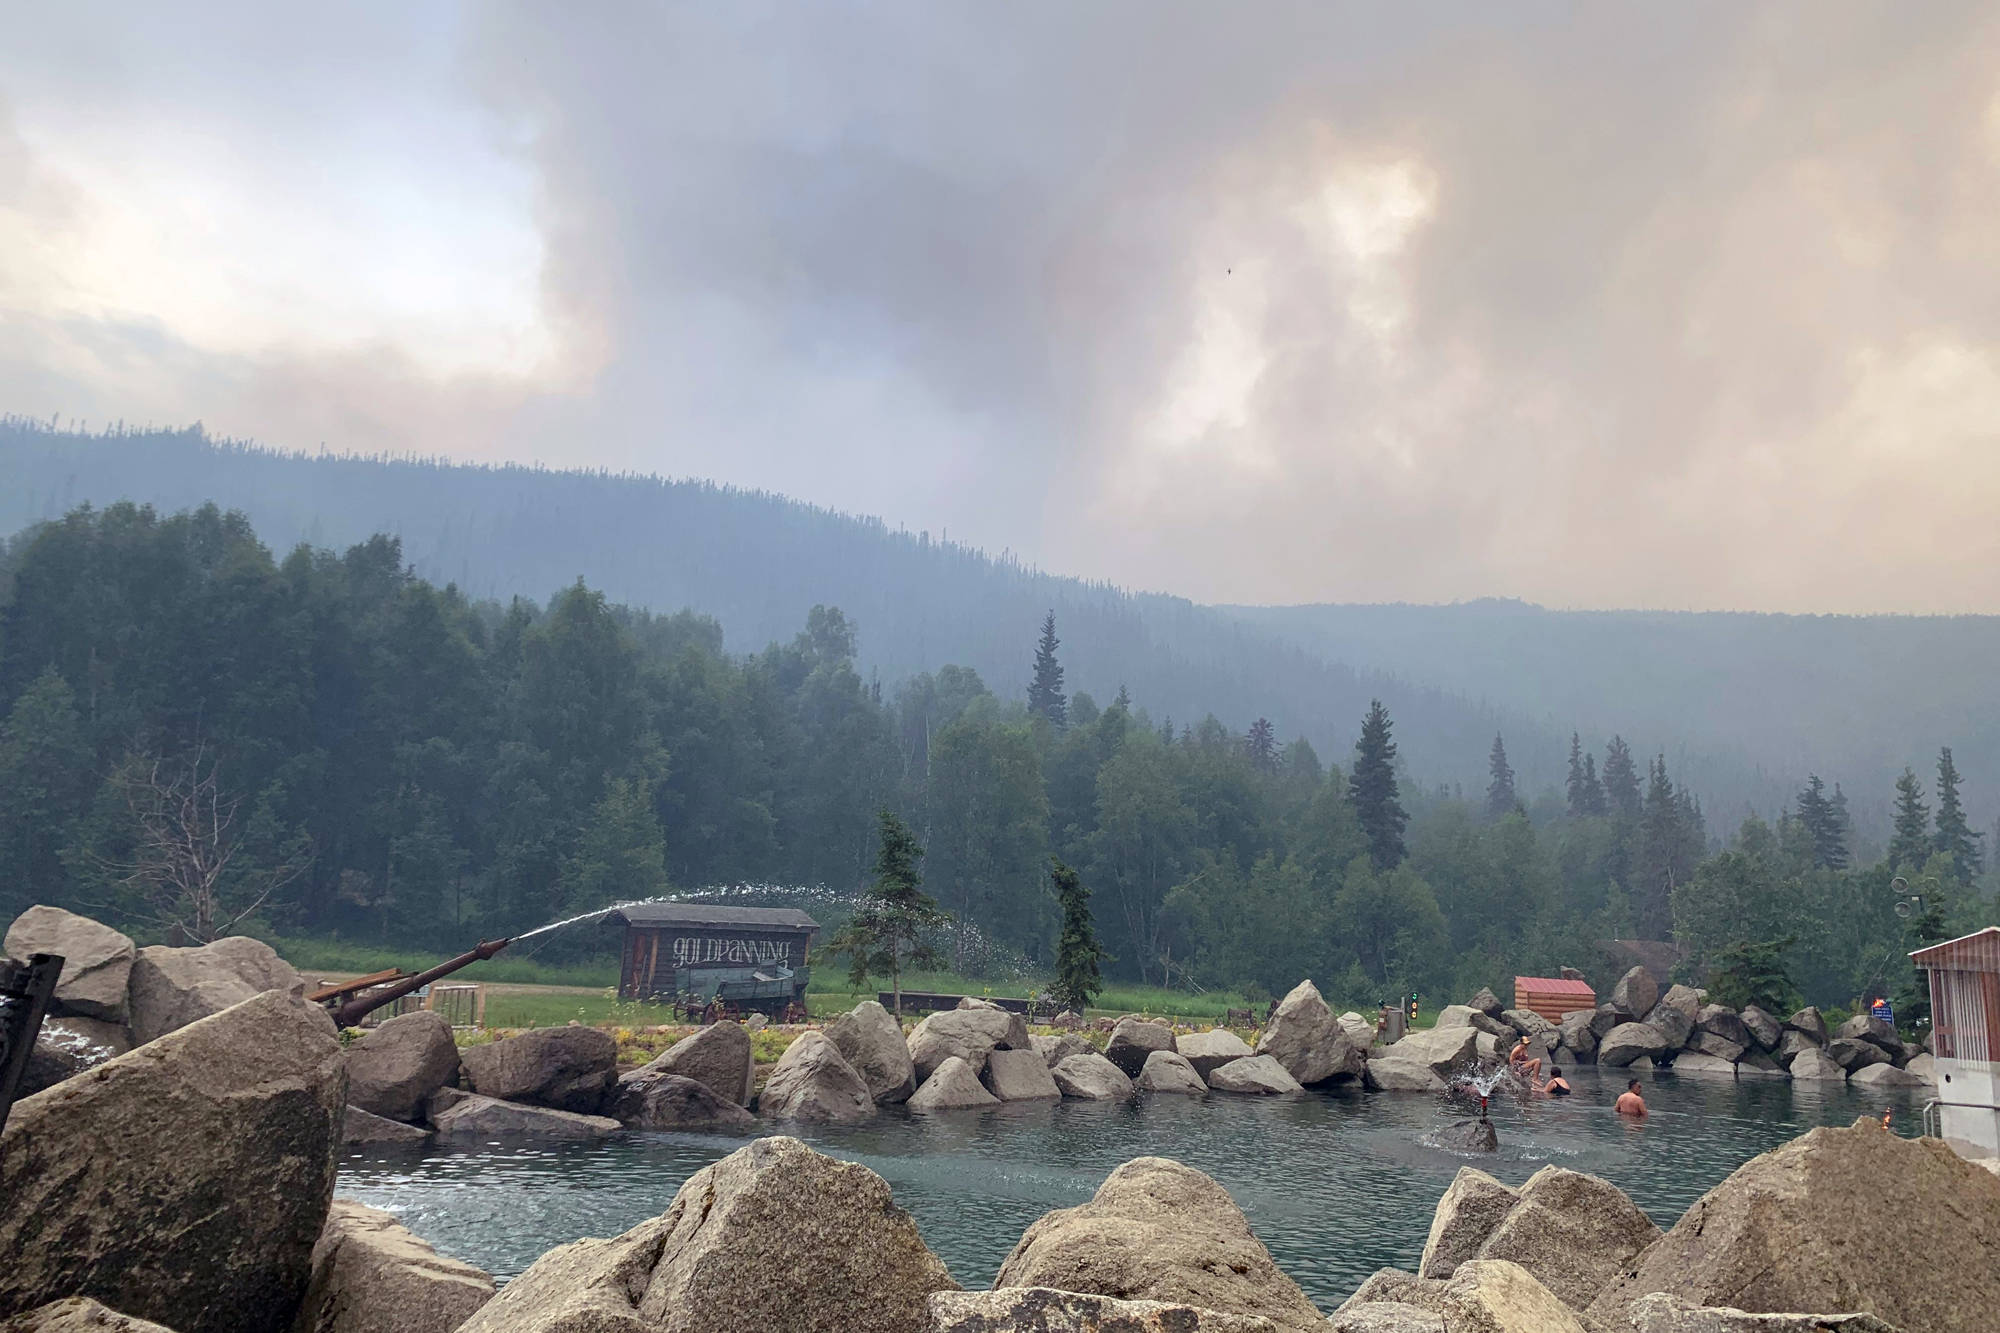 Alaska Division of Forestry via Associated Press
Smoke from the Munson Creek Fire rises behind the Chena Hot Springs Resort as guests watch from the outdoor rock pool near Fairbanks, on Monday. Authorities on Monday advised residents and guests to evacuate immediately after a nearby wildfire intensified. The Fairbanks North Star Borough issued the evacuation order when the fire reached a point less than a mile behind Chena Hot Springs.